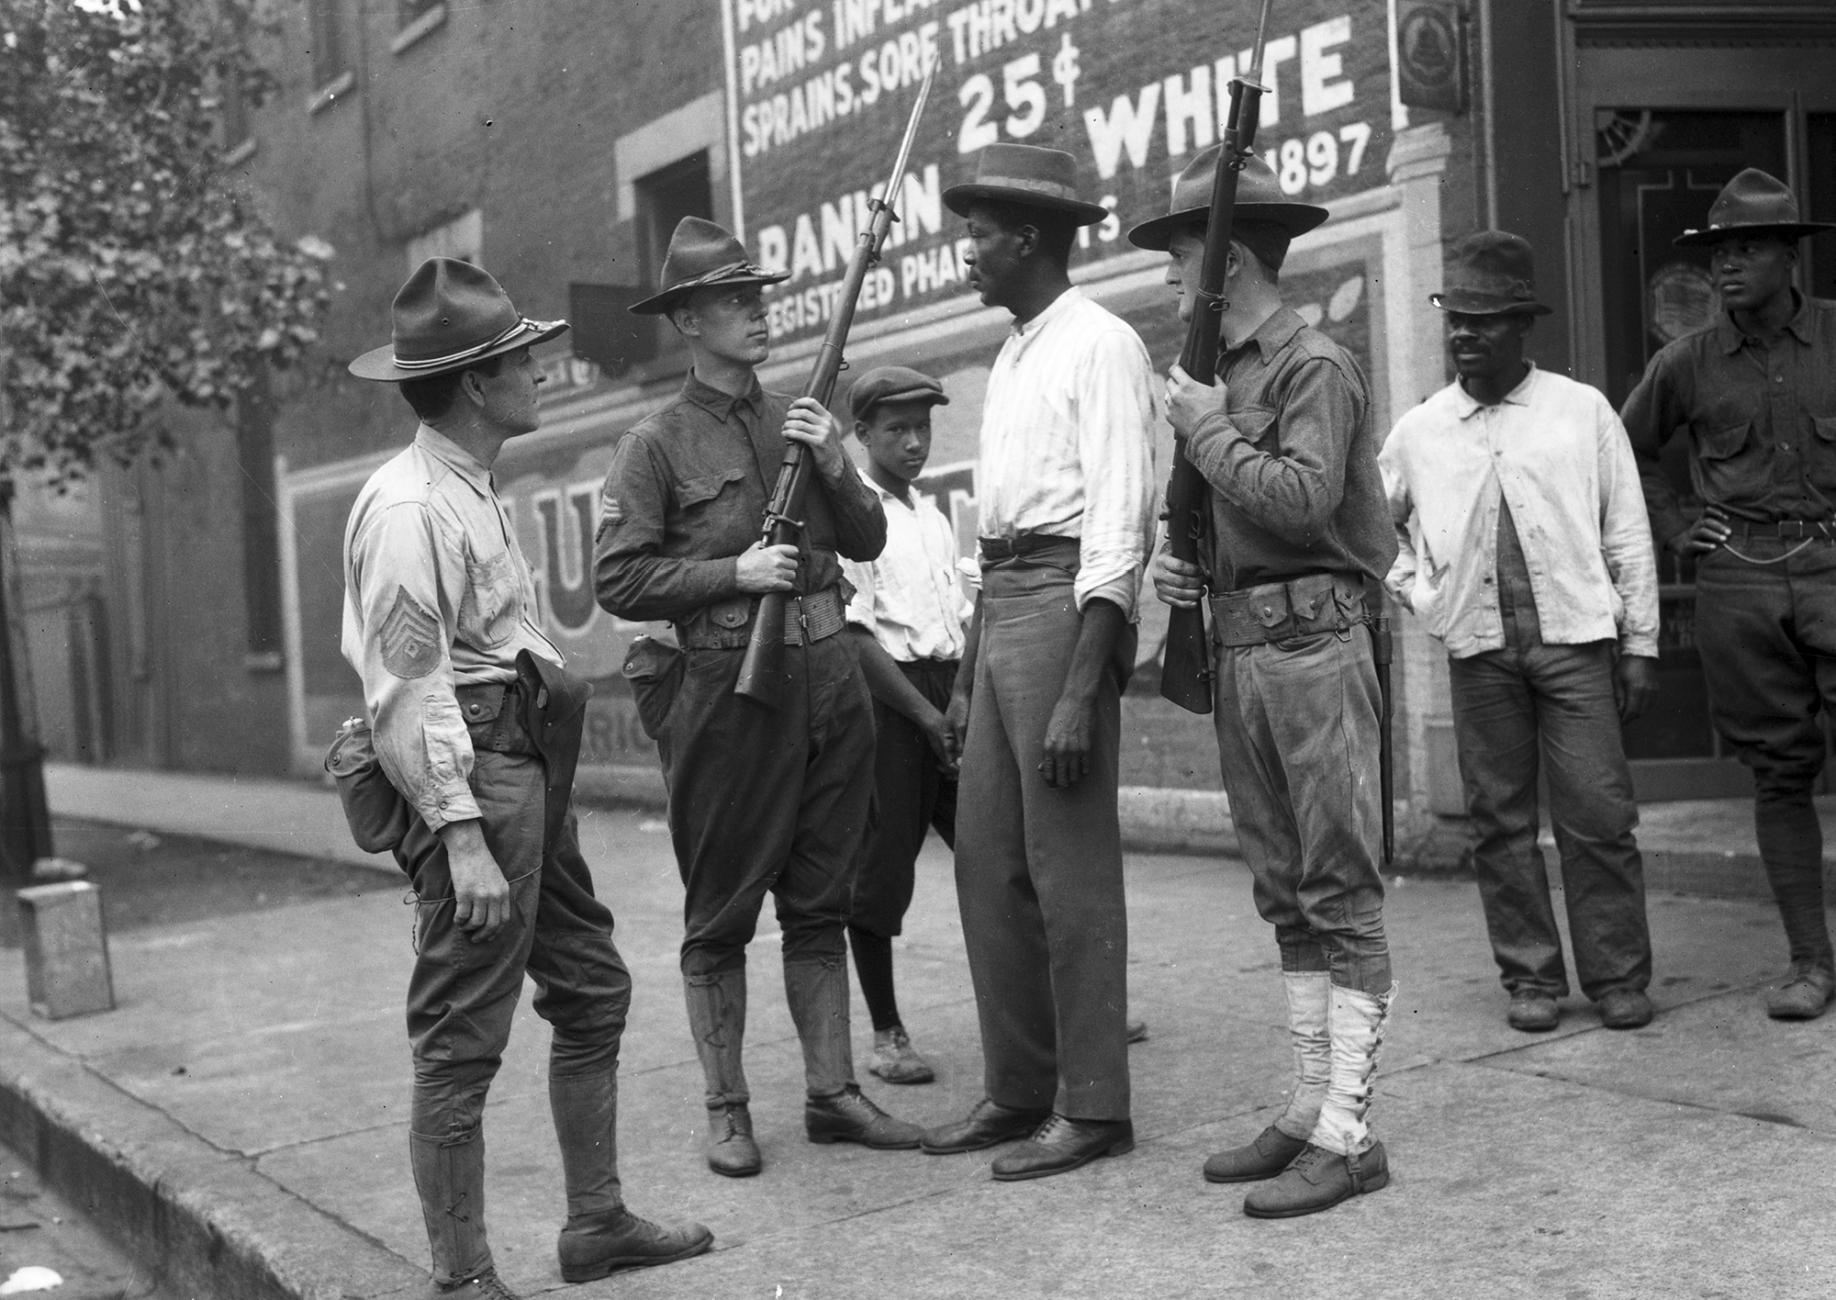 National Guard soldiers and African American men on a street corner in Chicago during the 1919 race riot